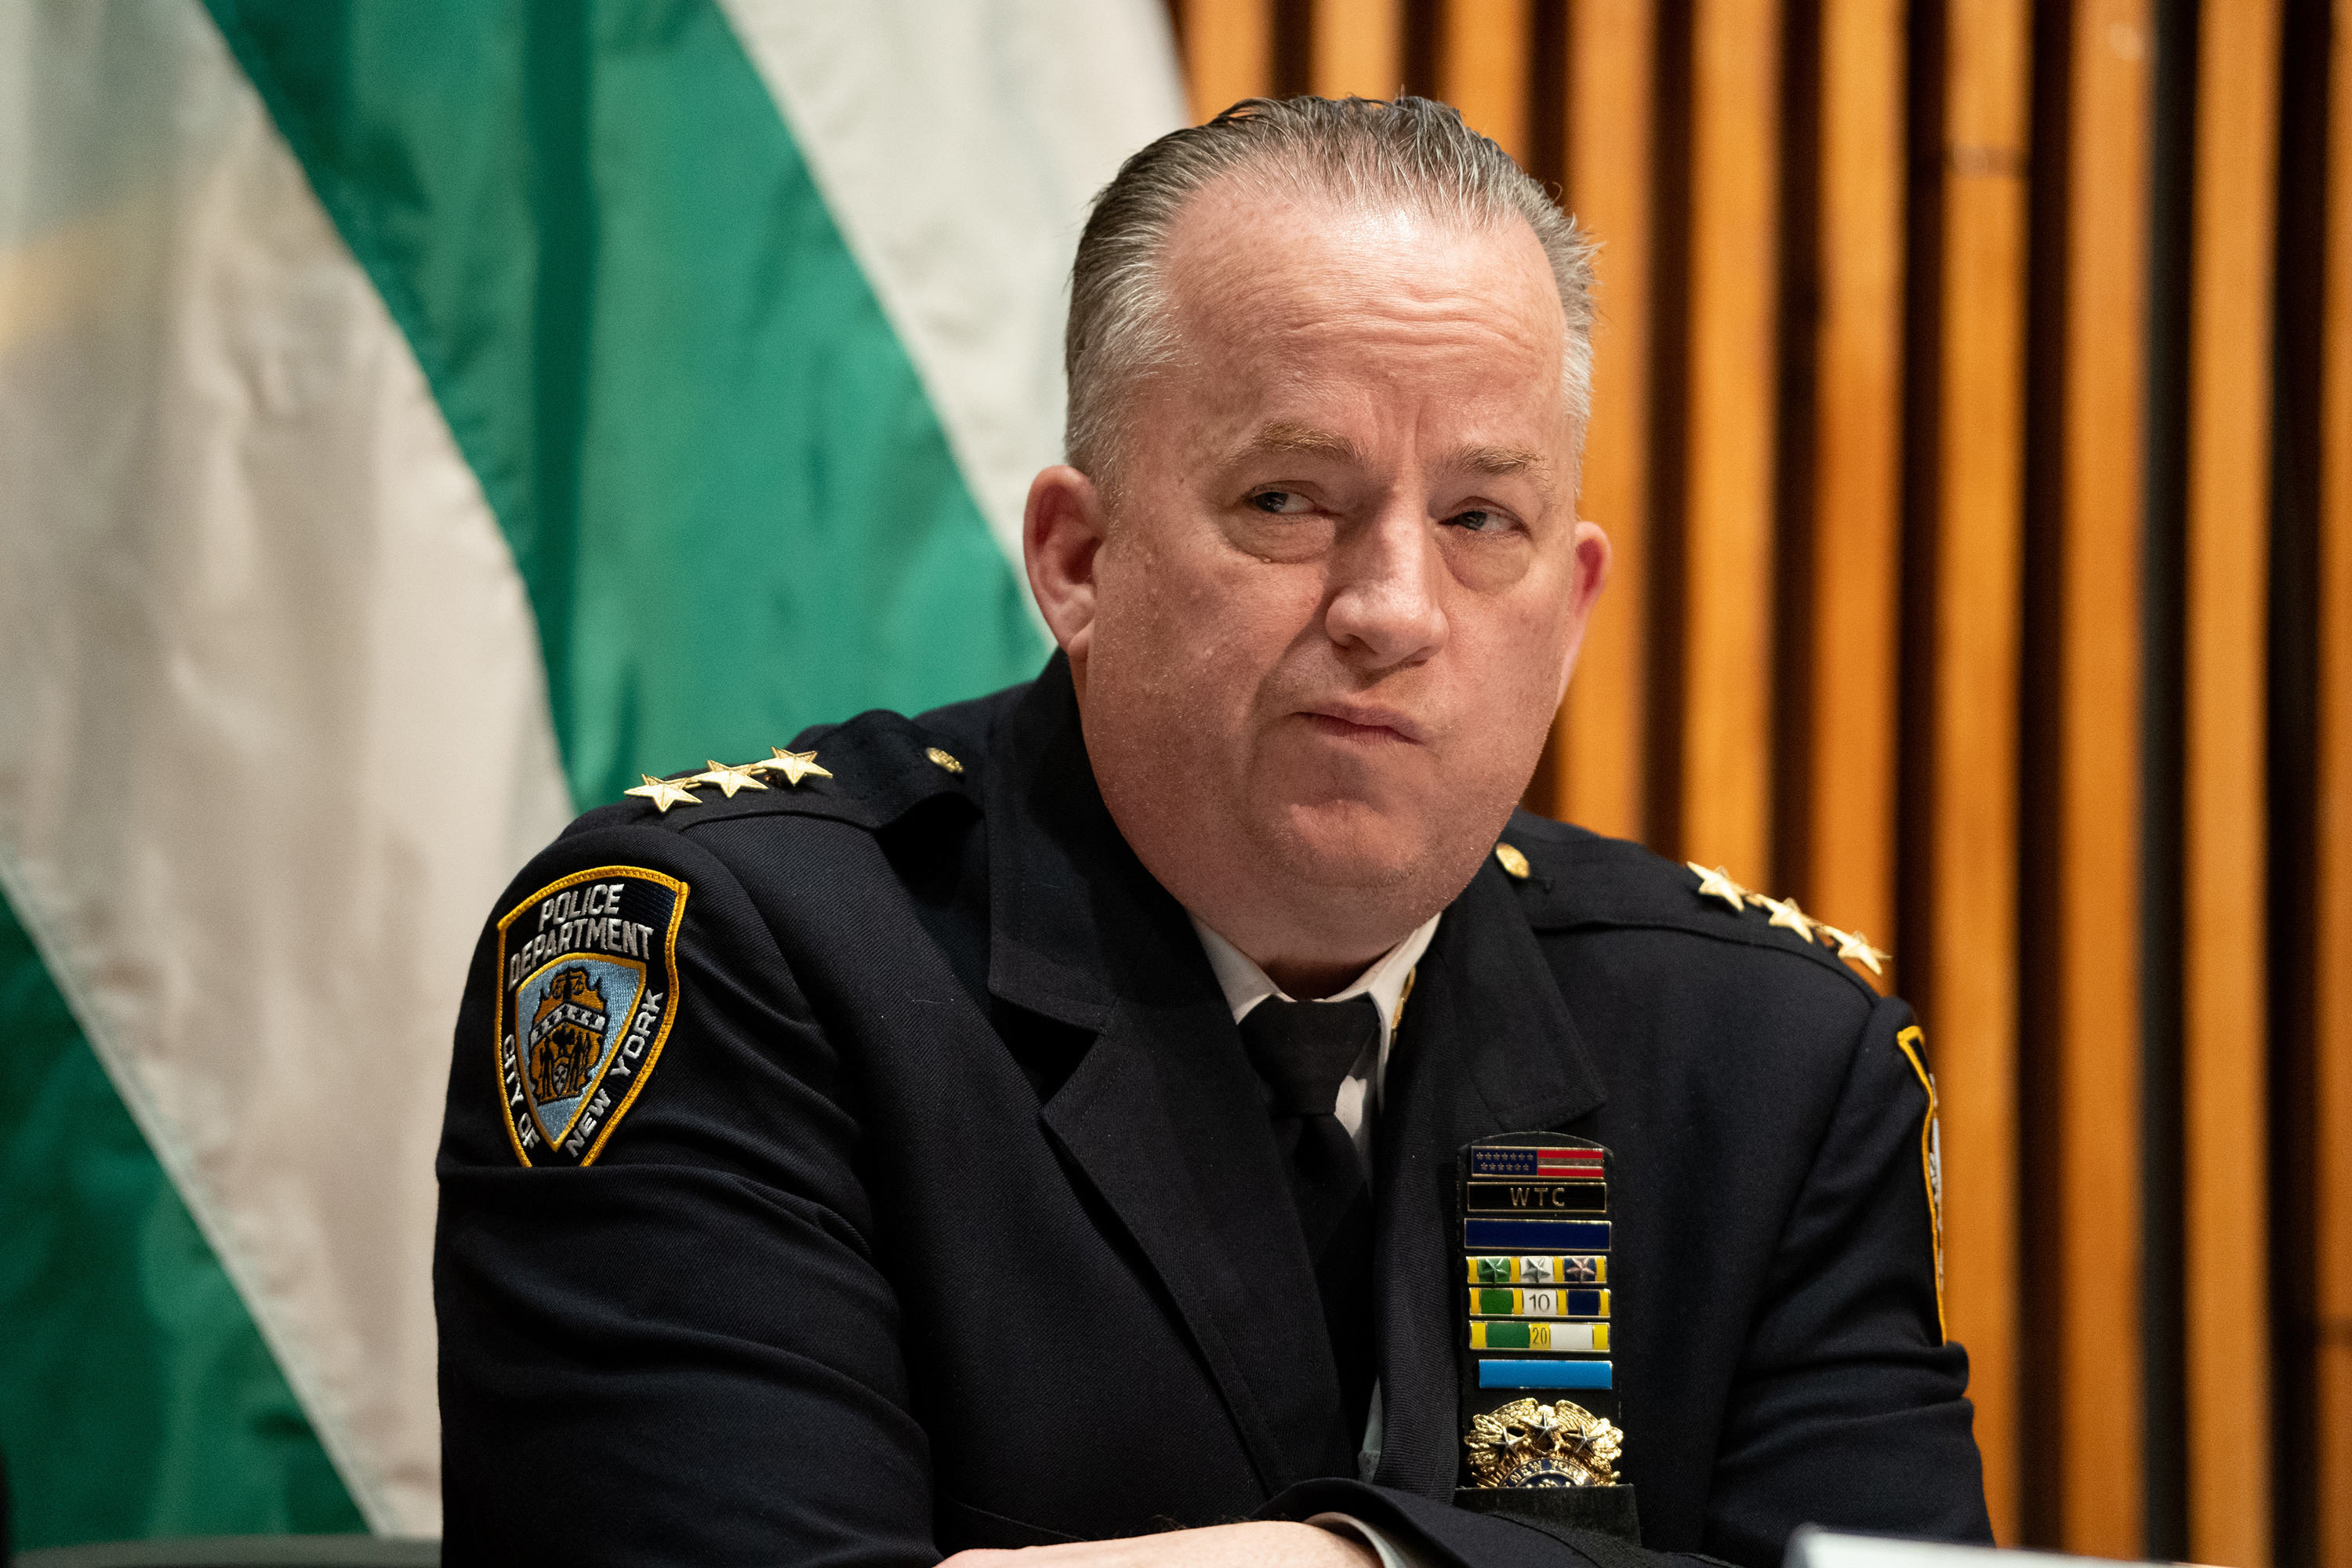 nypd brass refuse to answer council questions on controversial social media posts during tense hearing